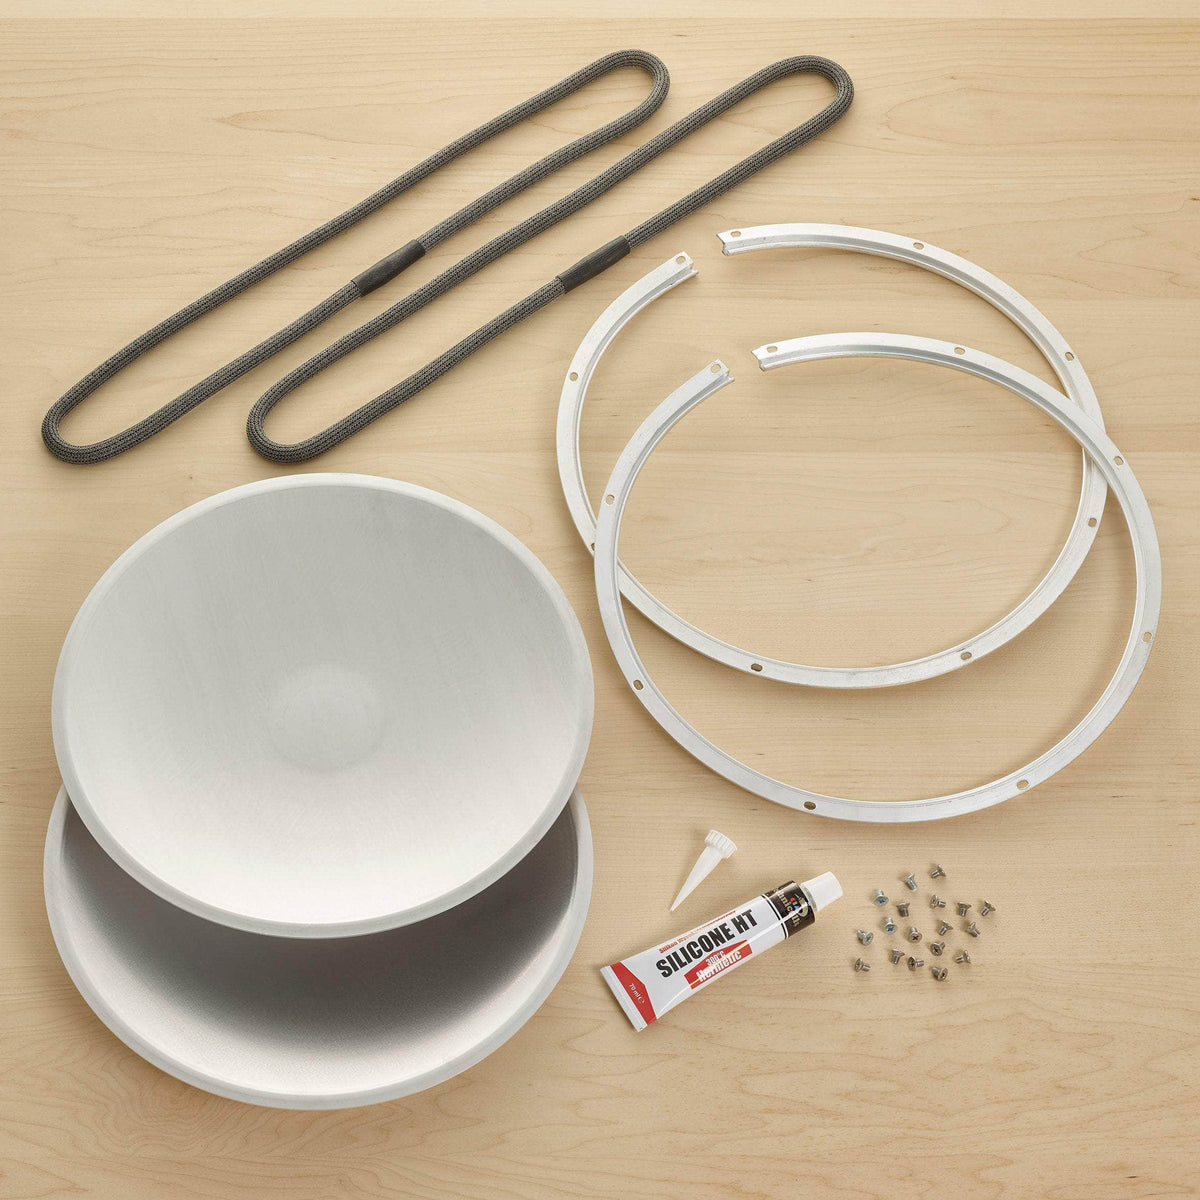 Aluminium lid liner replacement kit with retaining ring for use with Post 95 Aga range cooker